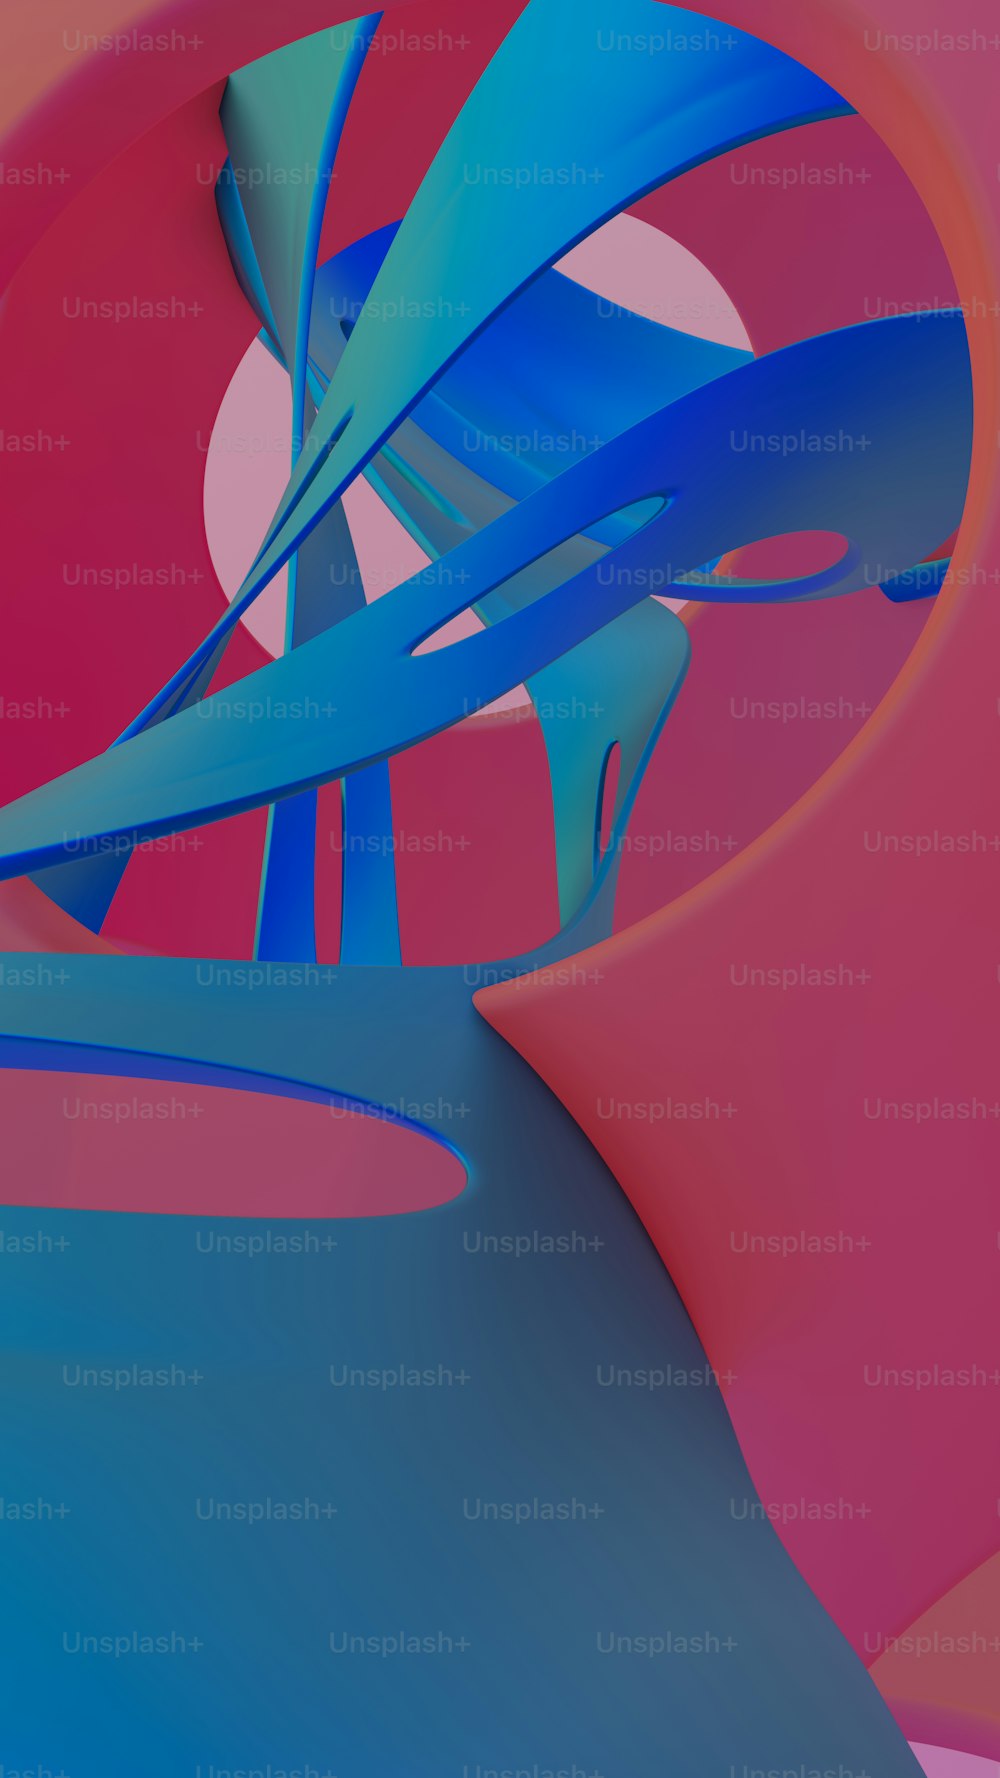 an abstract image of a blue and pink object